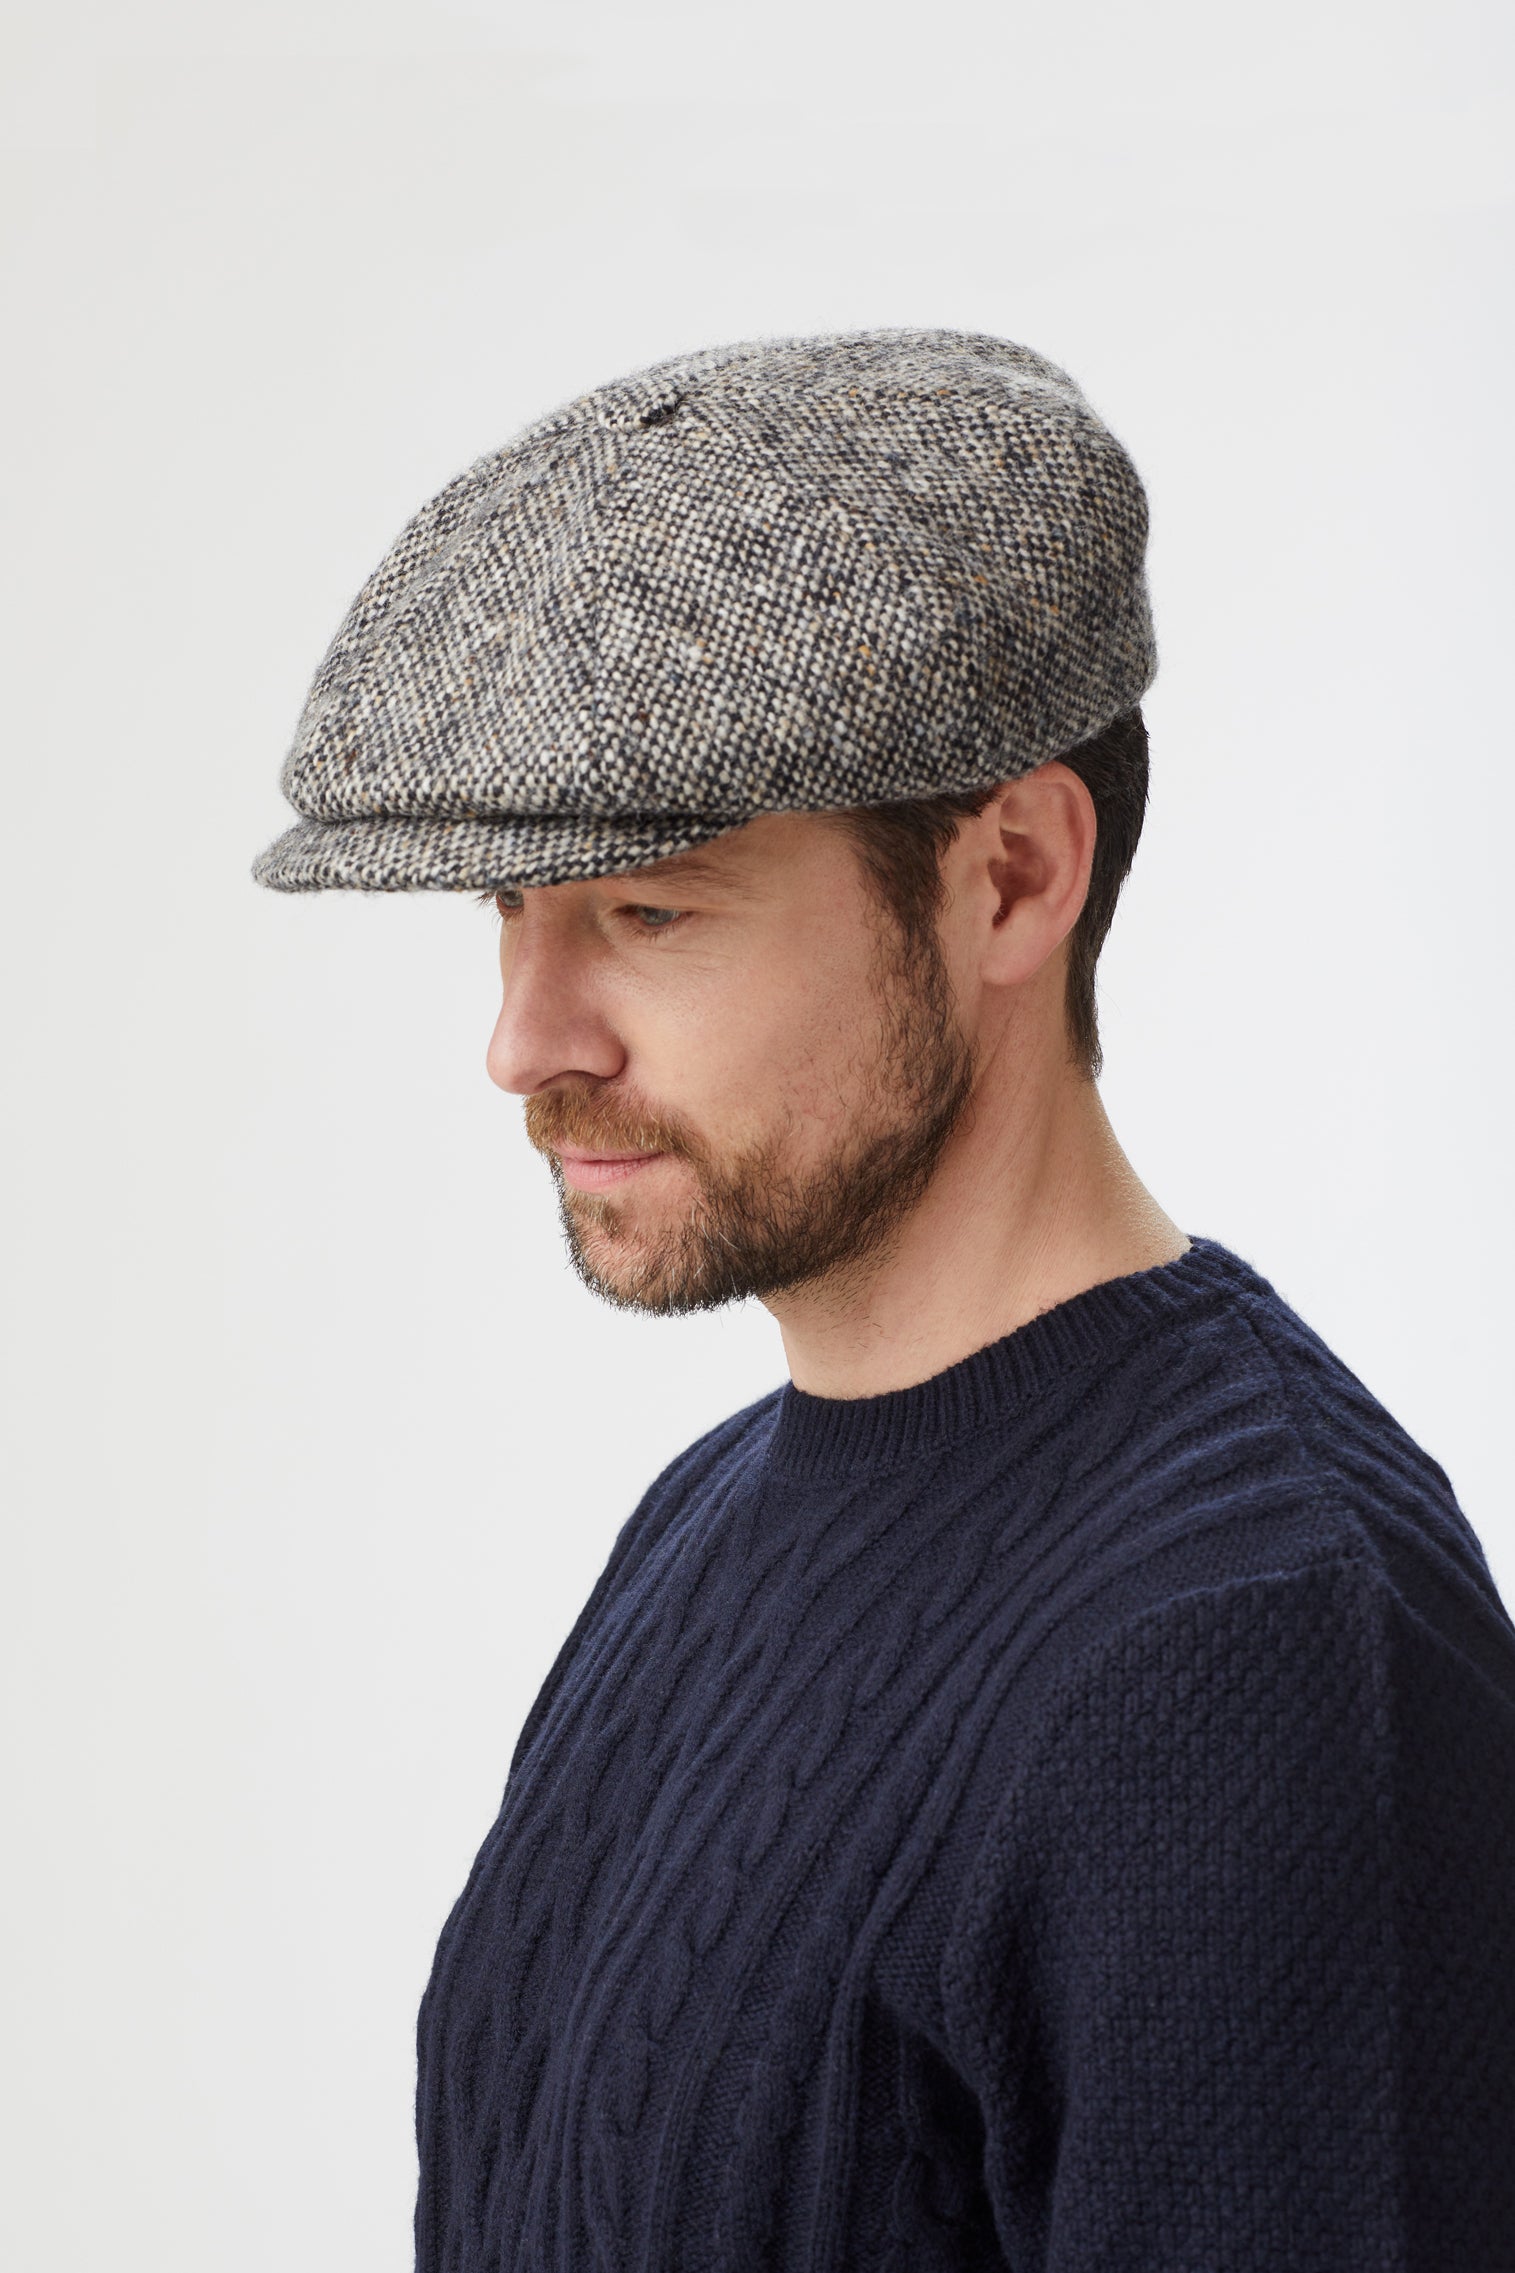 Muirfield Tweed Bakerboy Cap - Hats for Round Face Shapes - Lock & Co. Hatters London UK